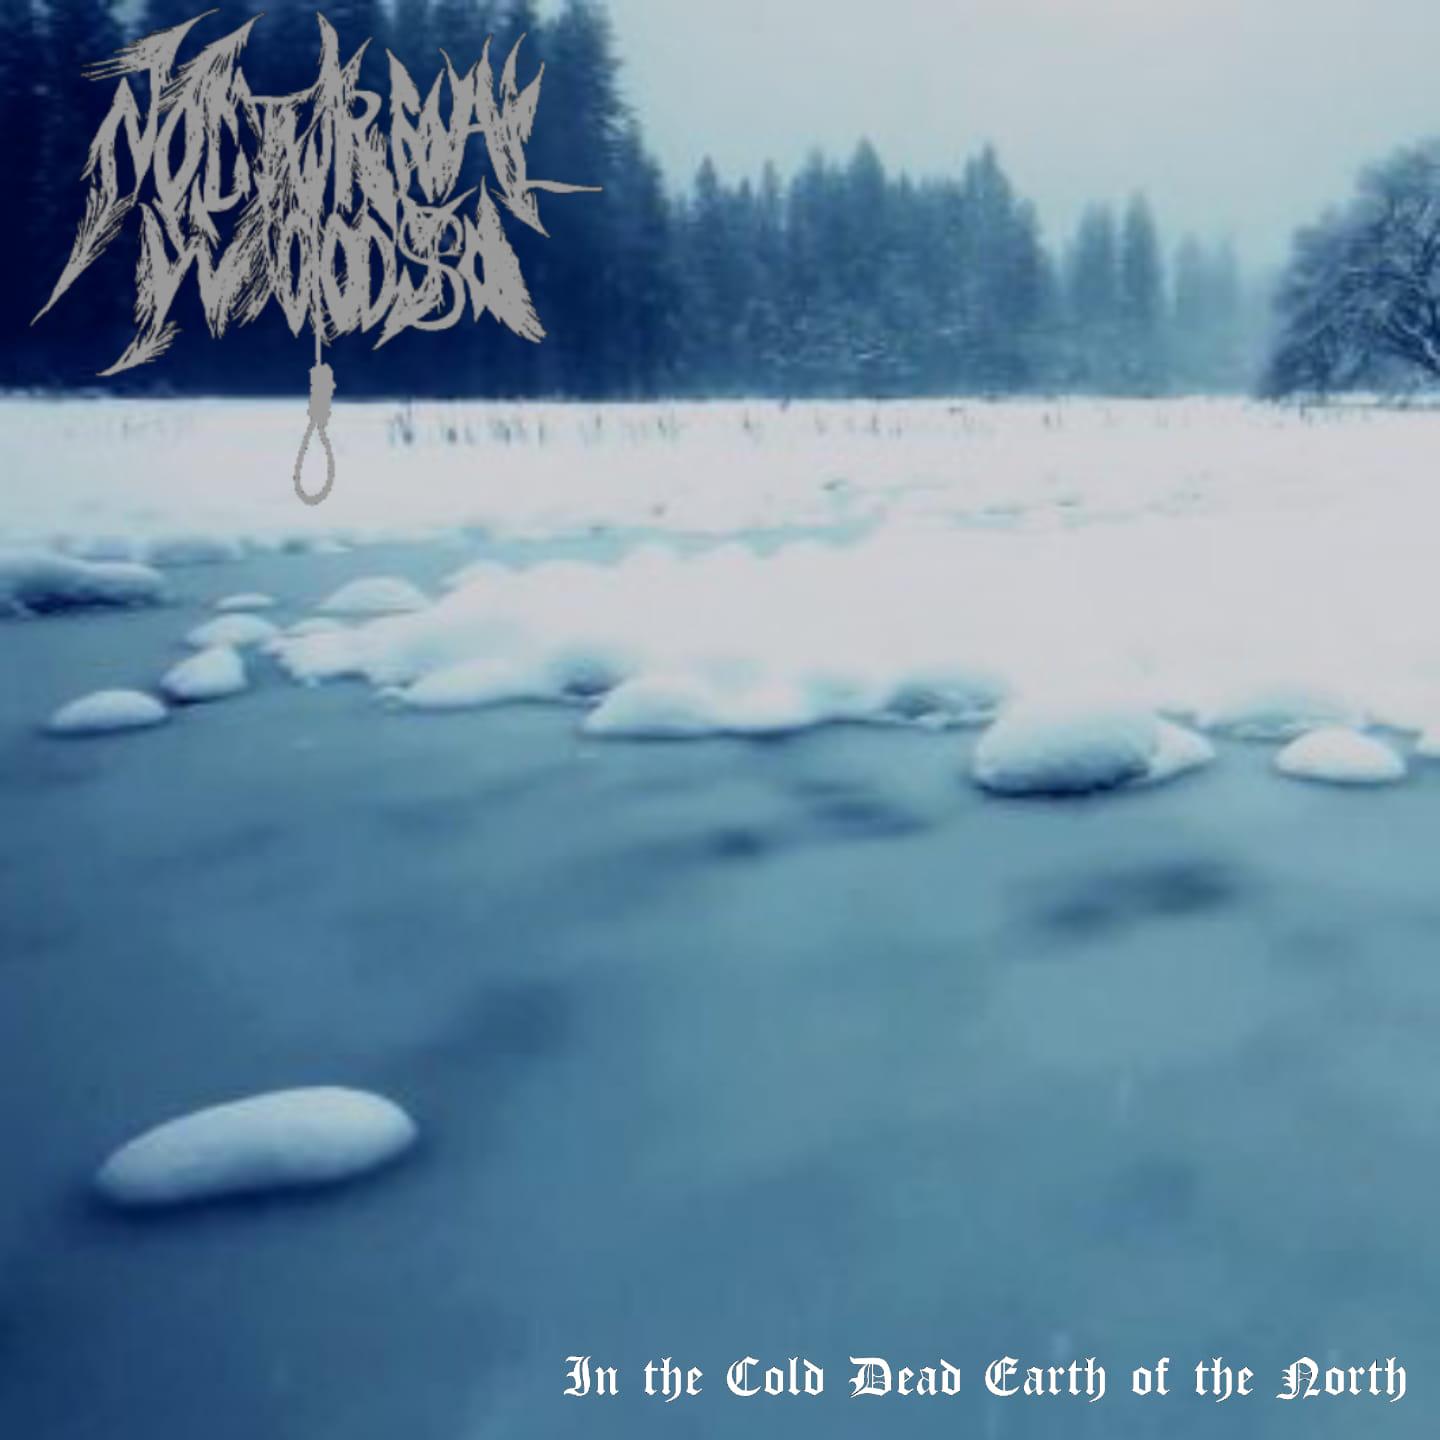 Cinderella "long Cold Winter". Neroth Nocturnal Woods Ep. Cold Earth – your Misery, my Triumph. Children of a Dead Earth.